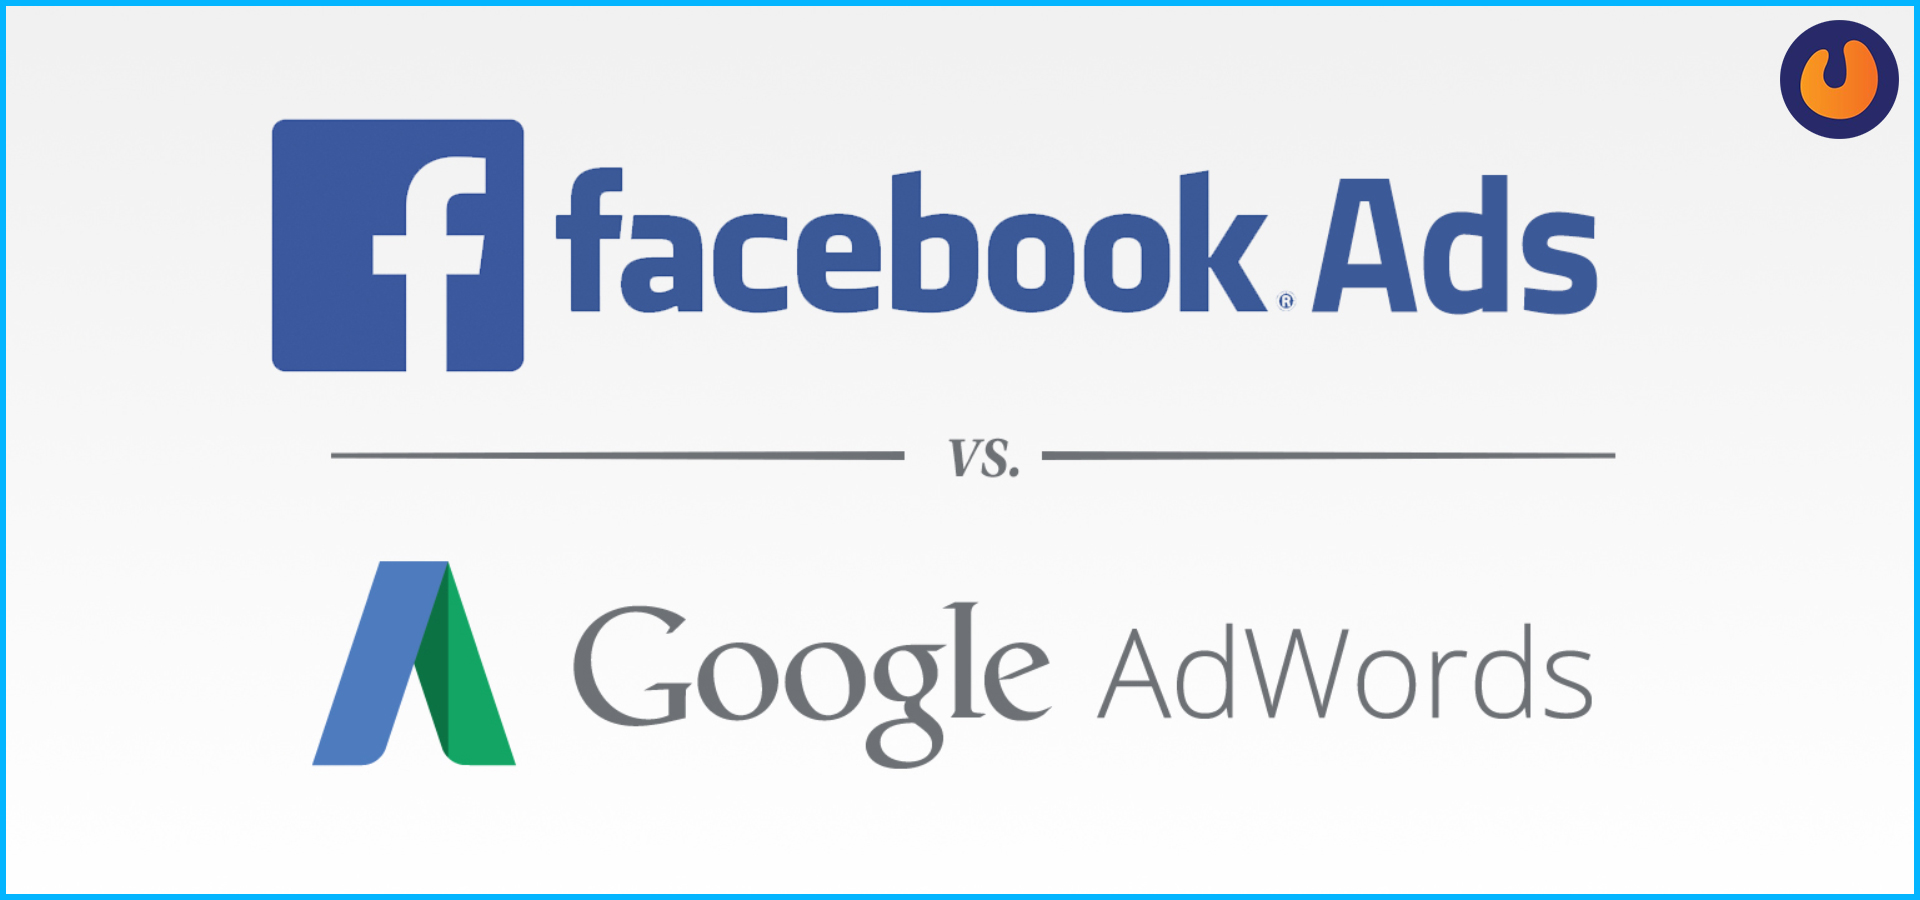 Facebook Ads vs. Google AdWords: Which Will Bring You More Revenue?